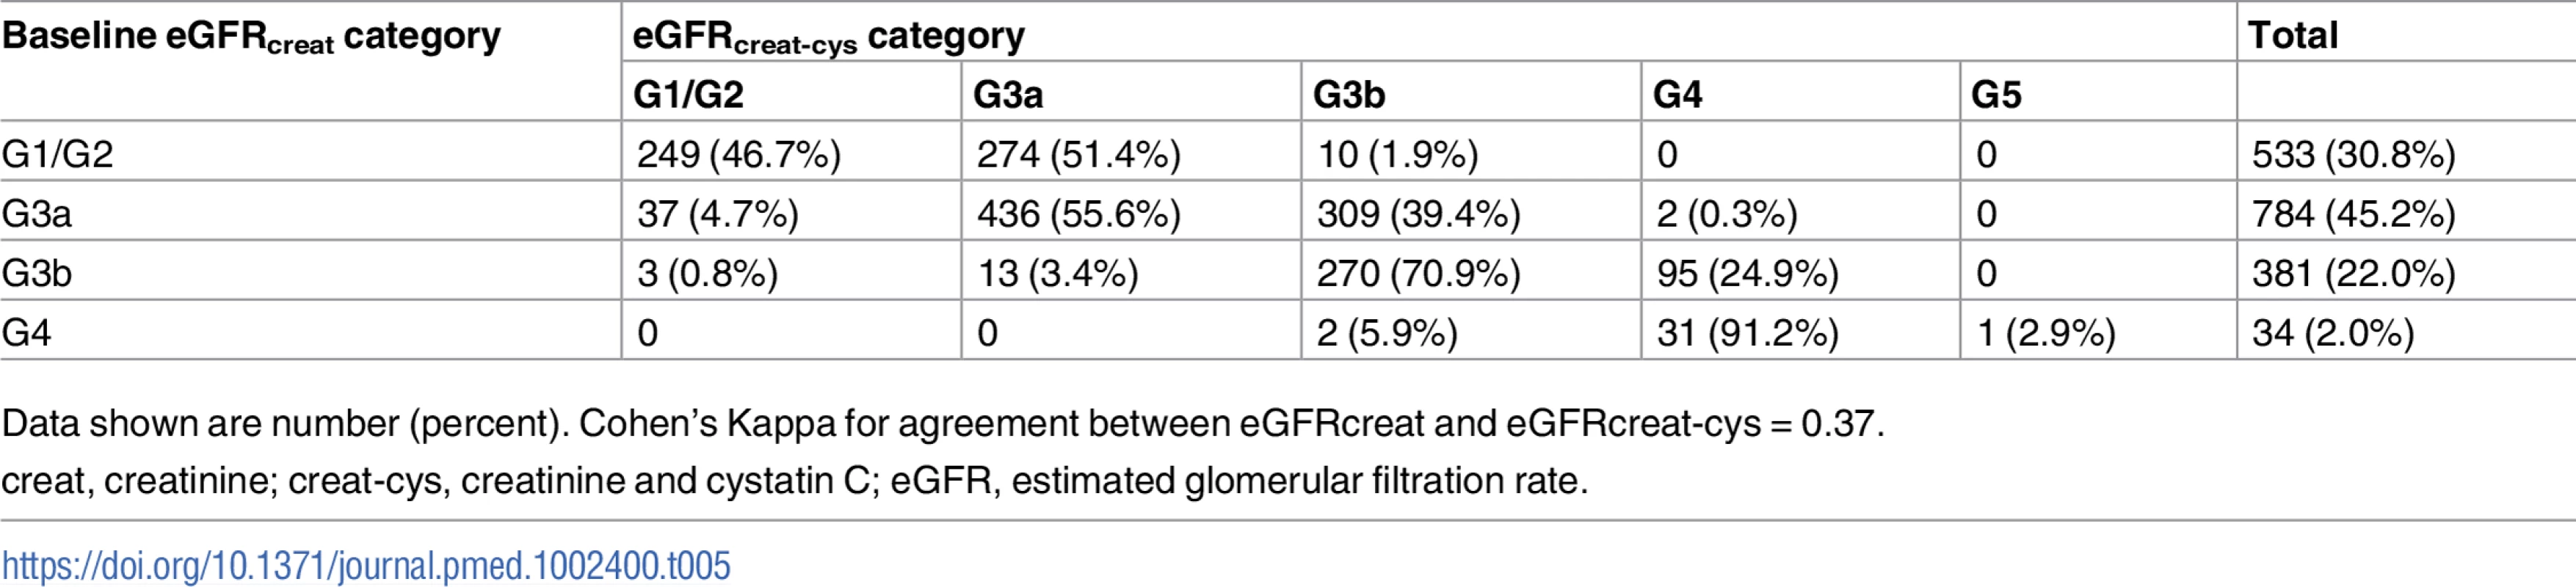 Baseline eGFRcreat category and reclassification using eGFRcreat-cys in all study participants.